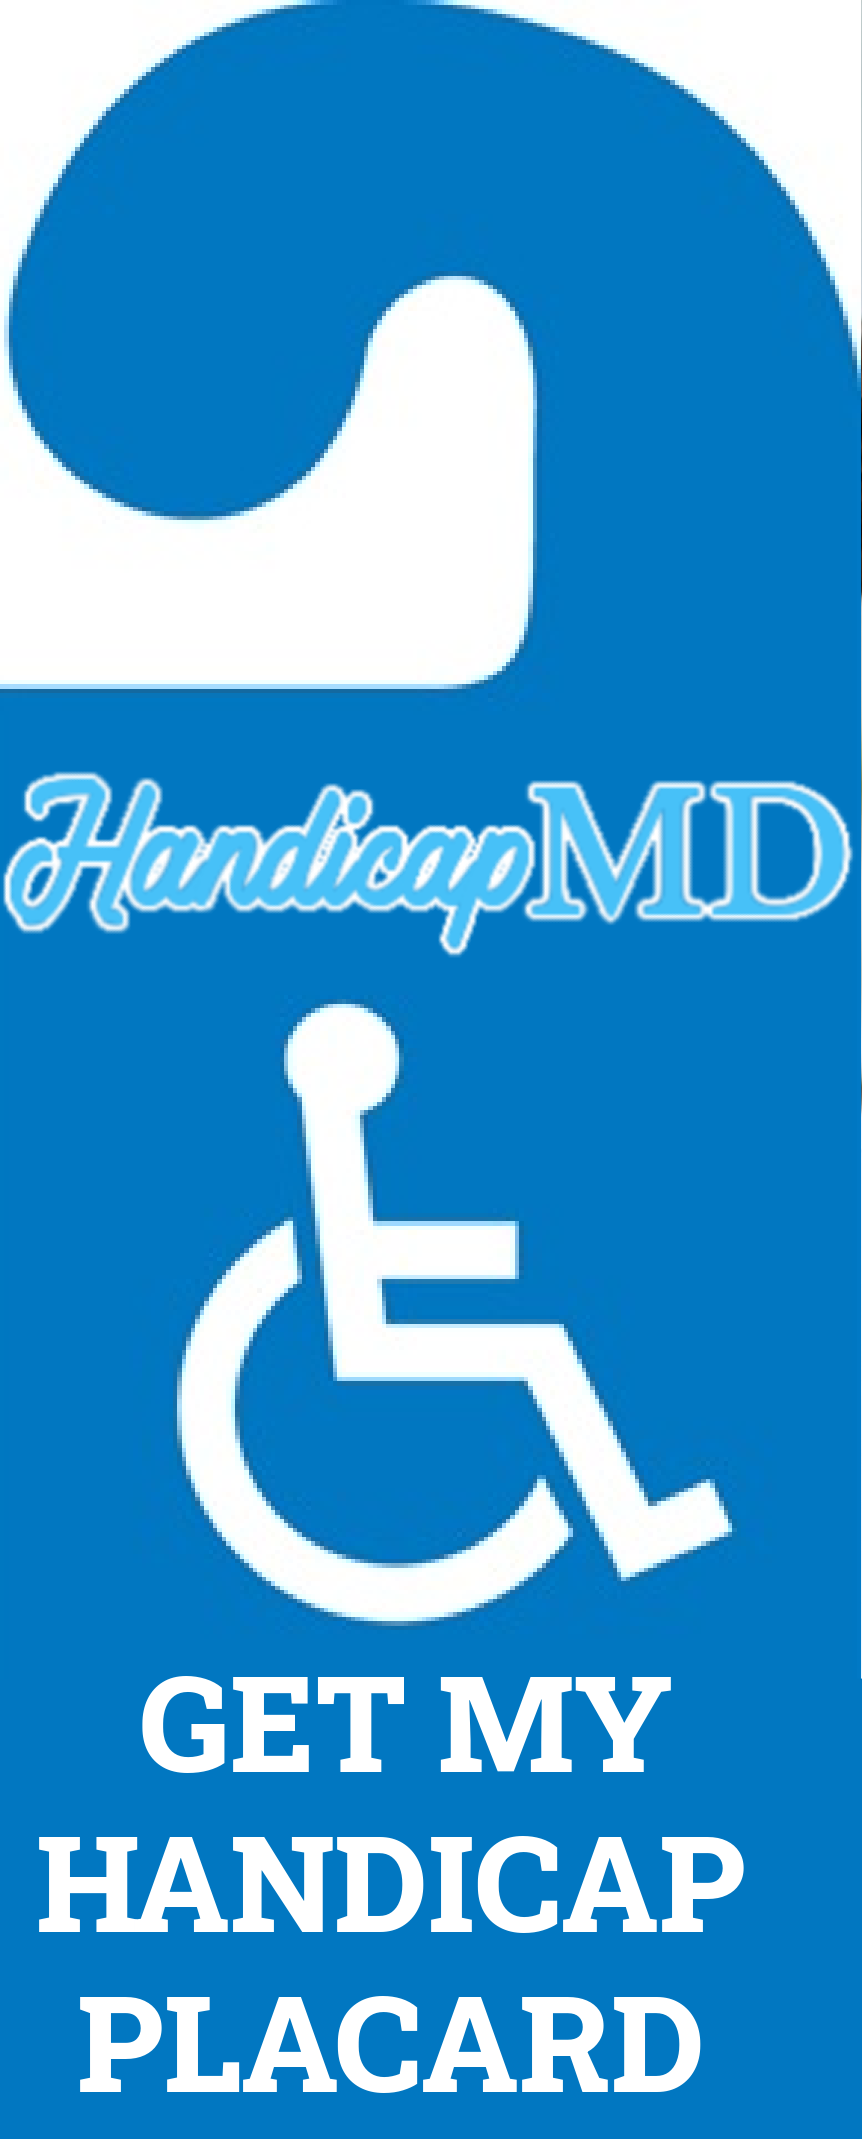 Get a Disabled Parking Permit in Philadelphia PA Online